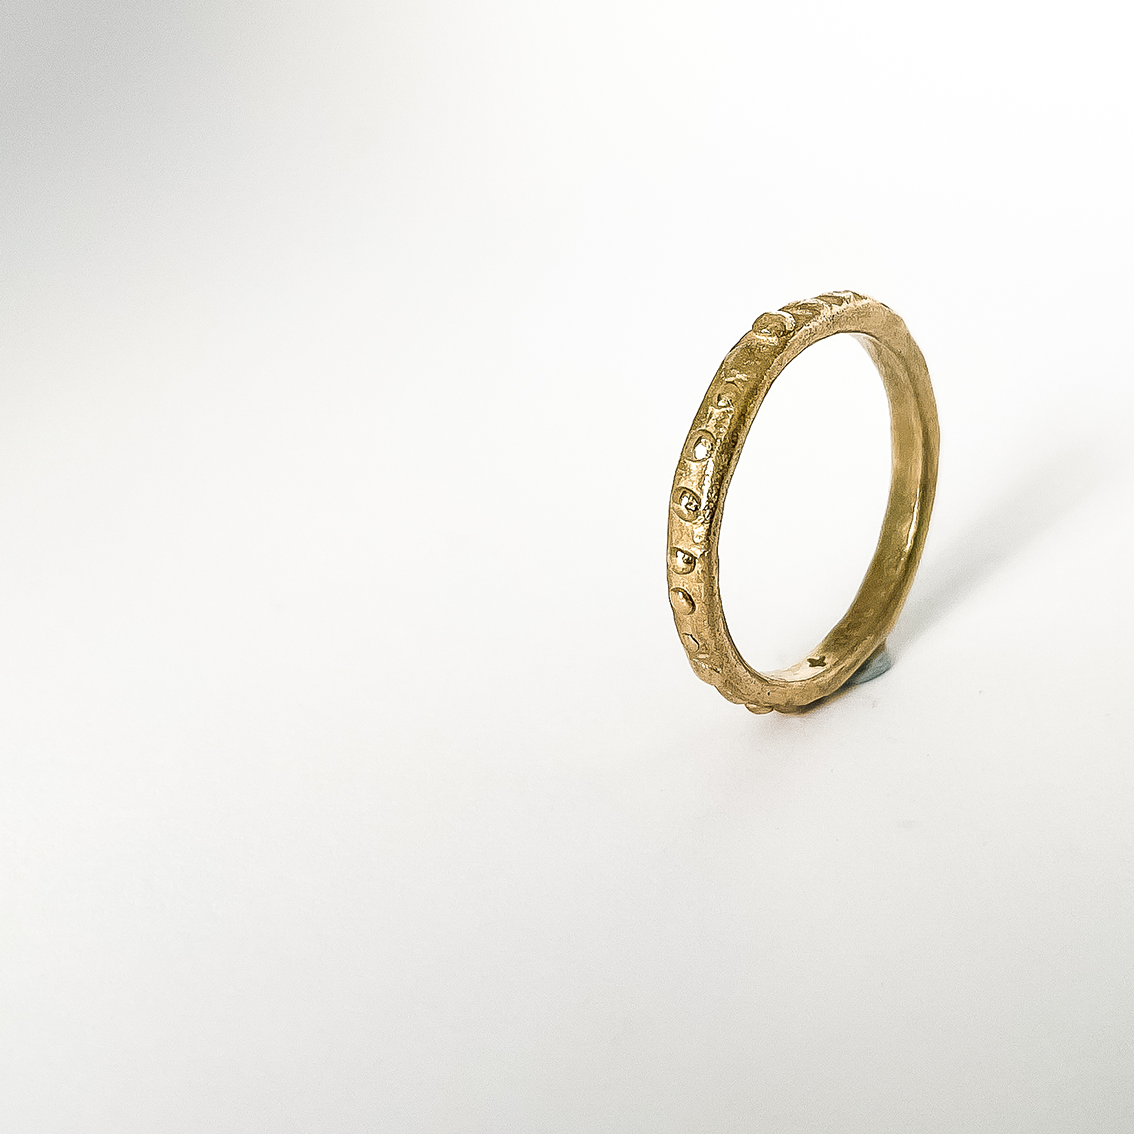 Fluid - 2mm Textured Ring Band - 9ct Yellow Gold